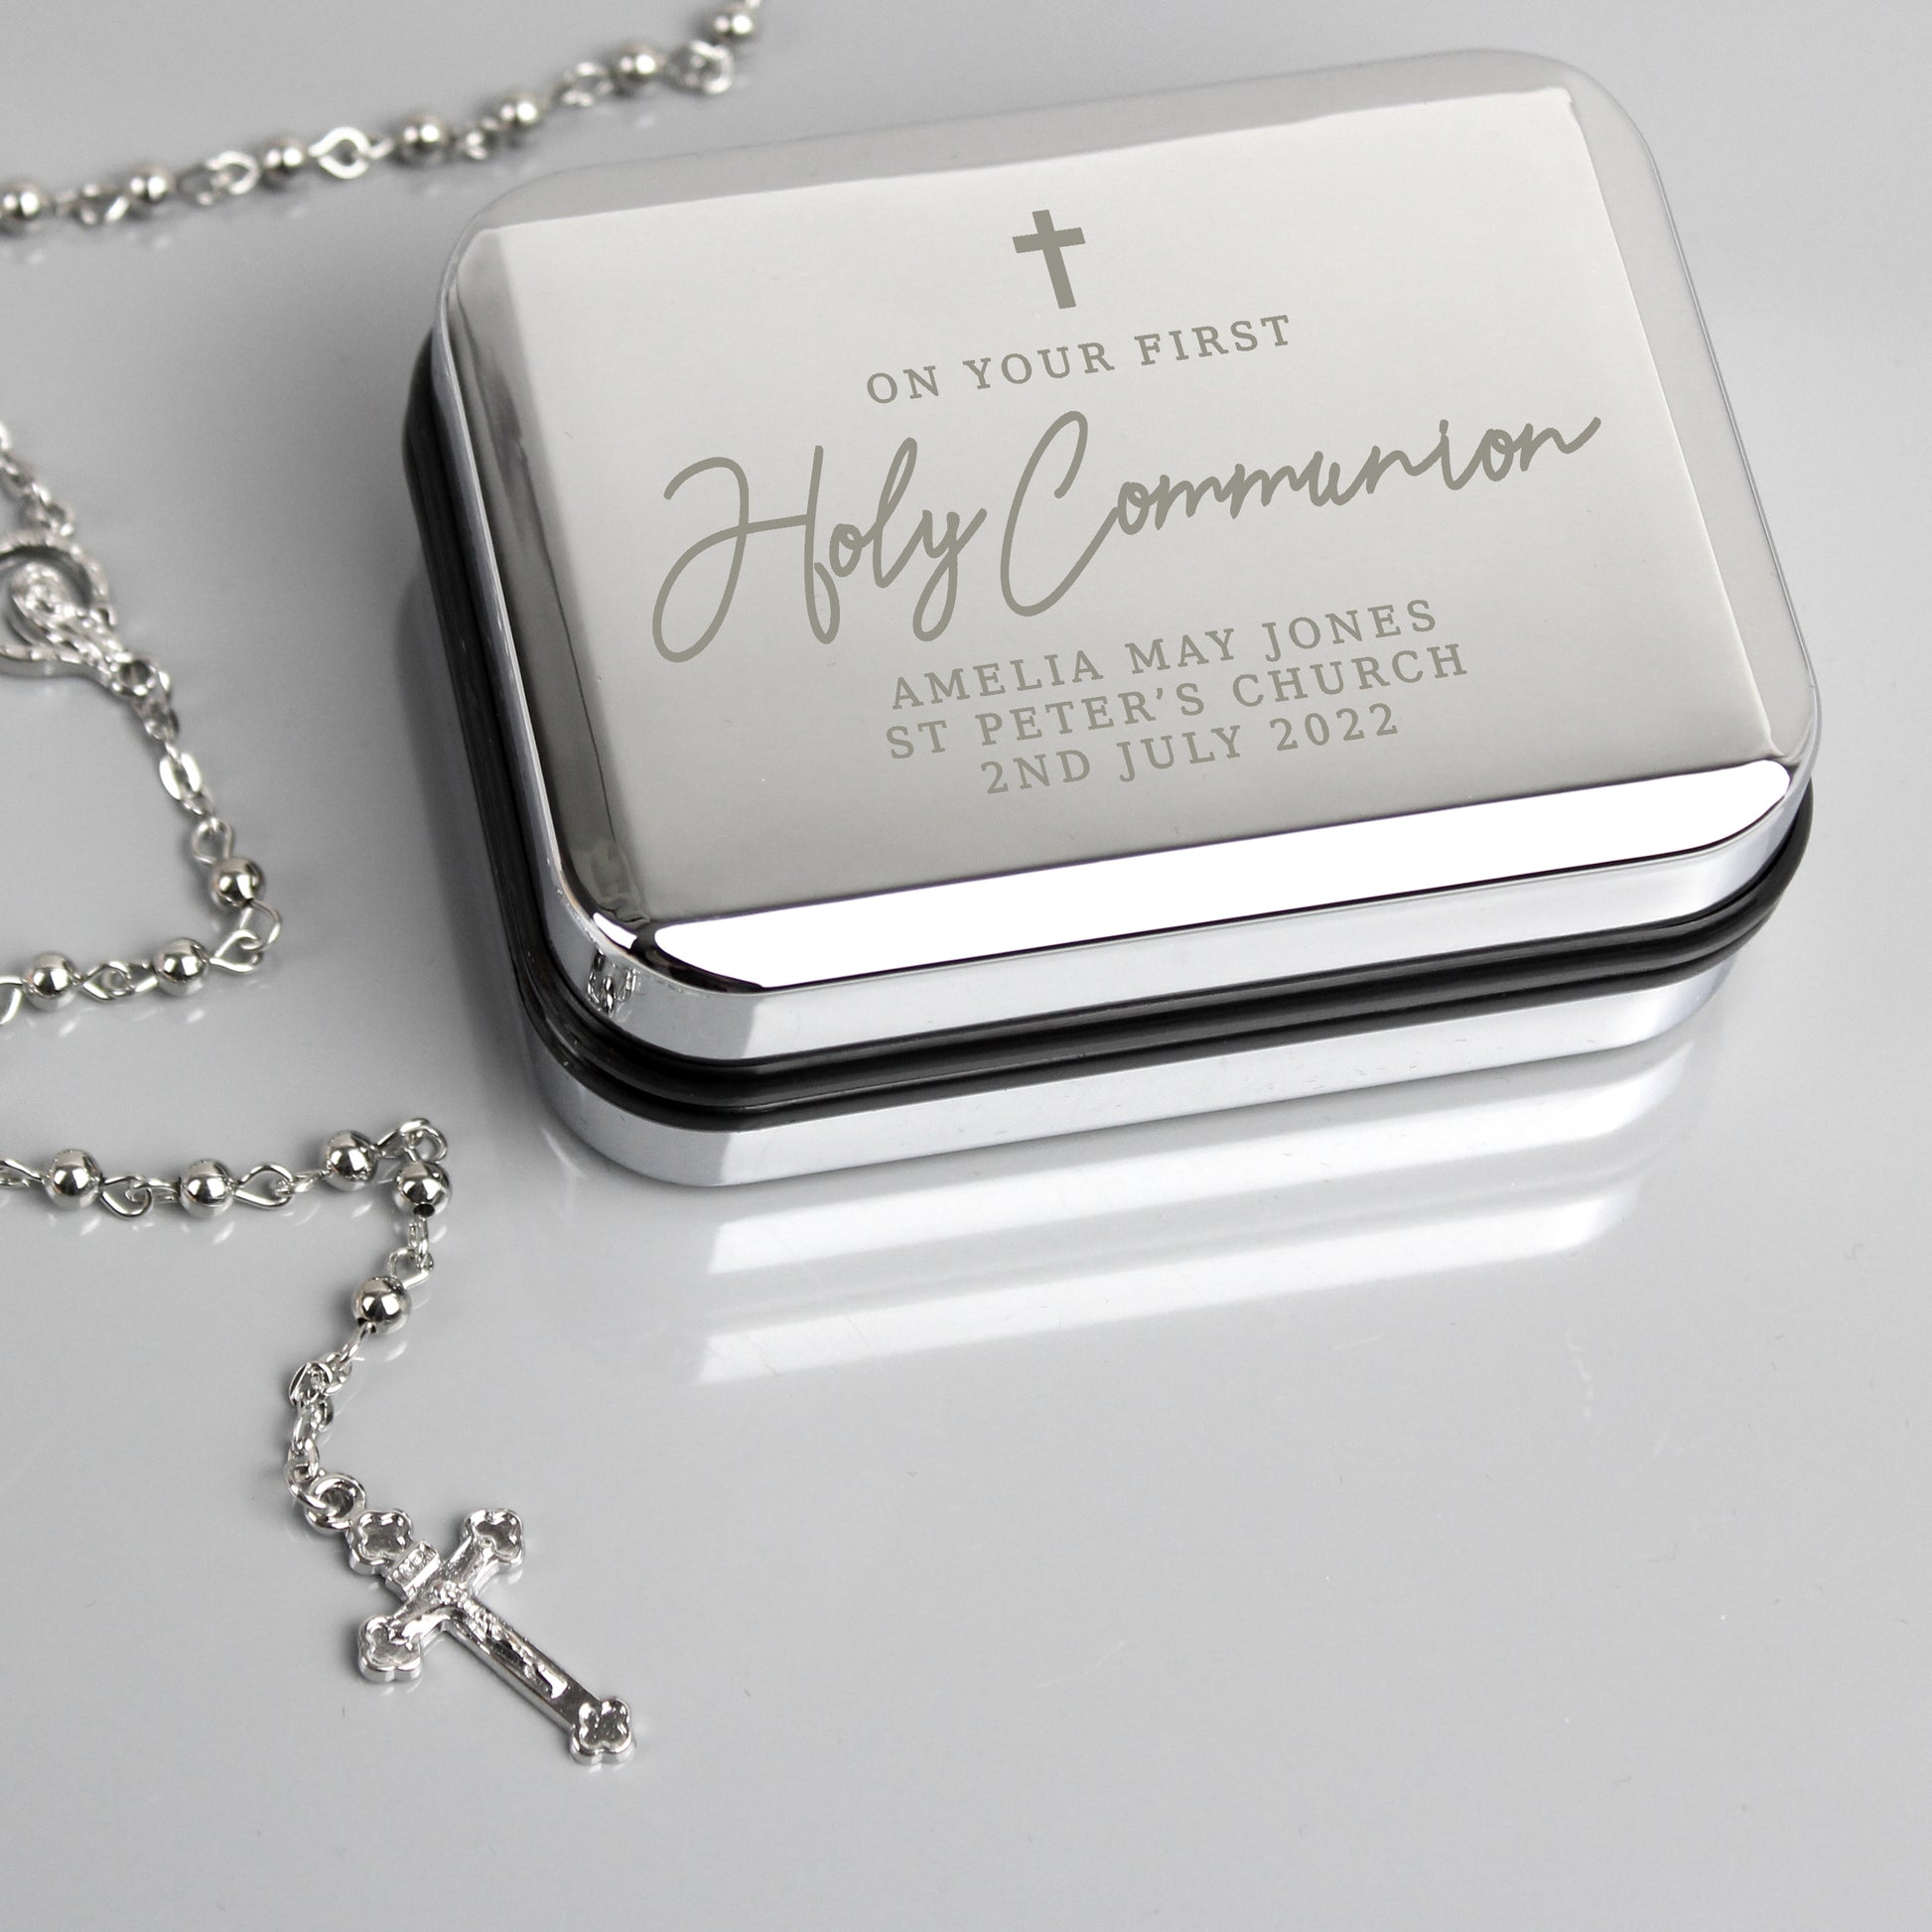 Steel first holy communion trinket box with engraved cross and "on your first holy communion" message, personalised with your own message of up to three lines and including rosary beads